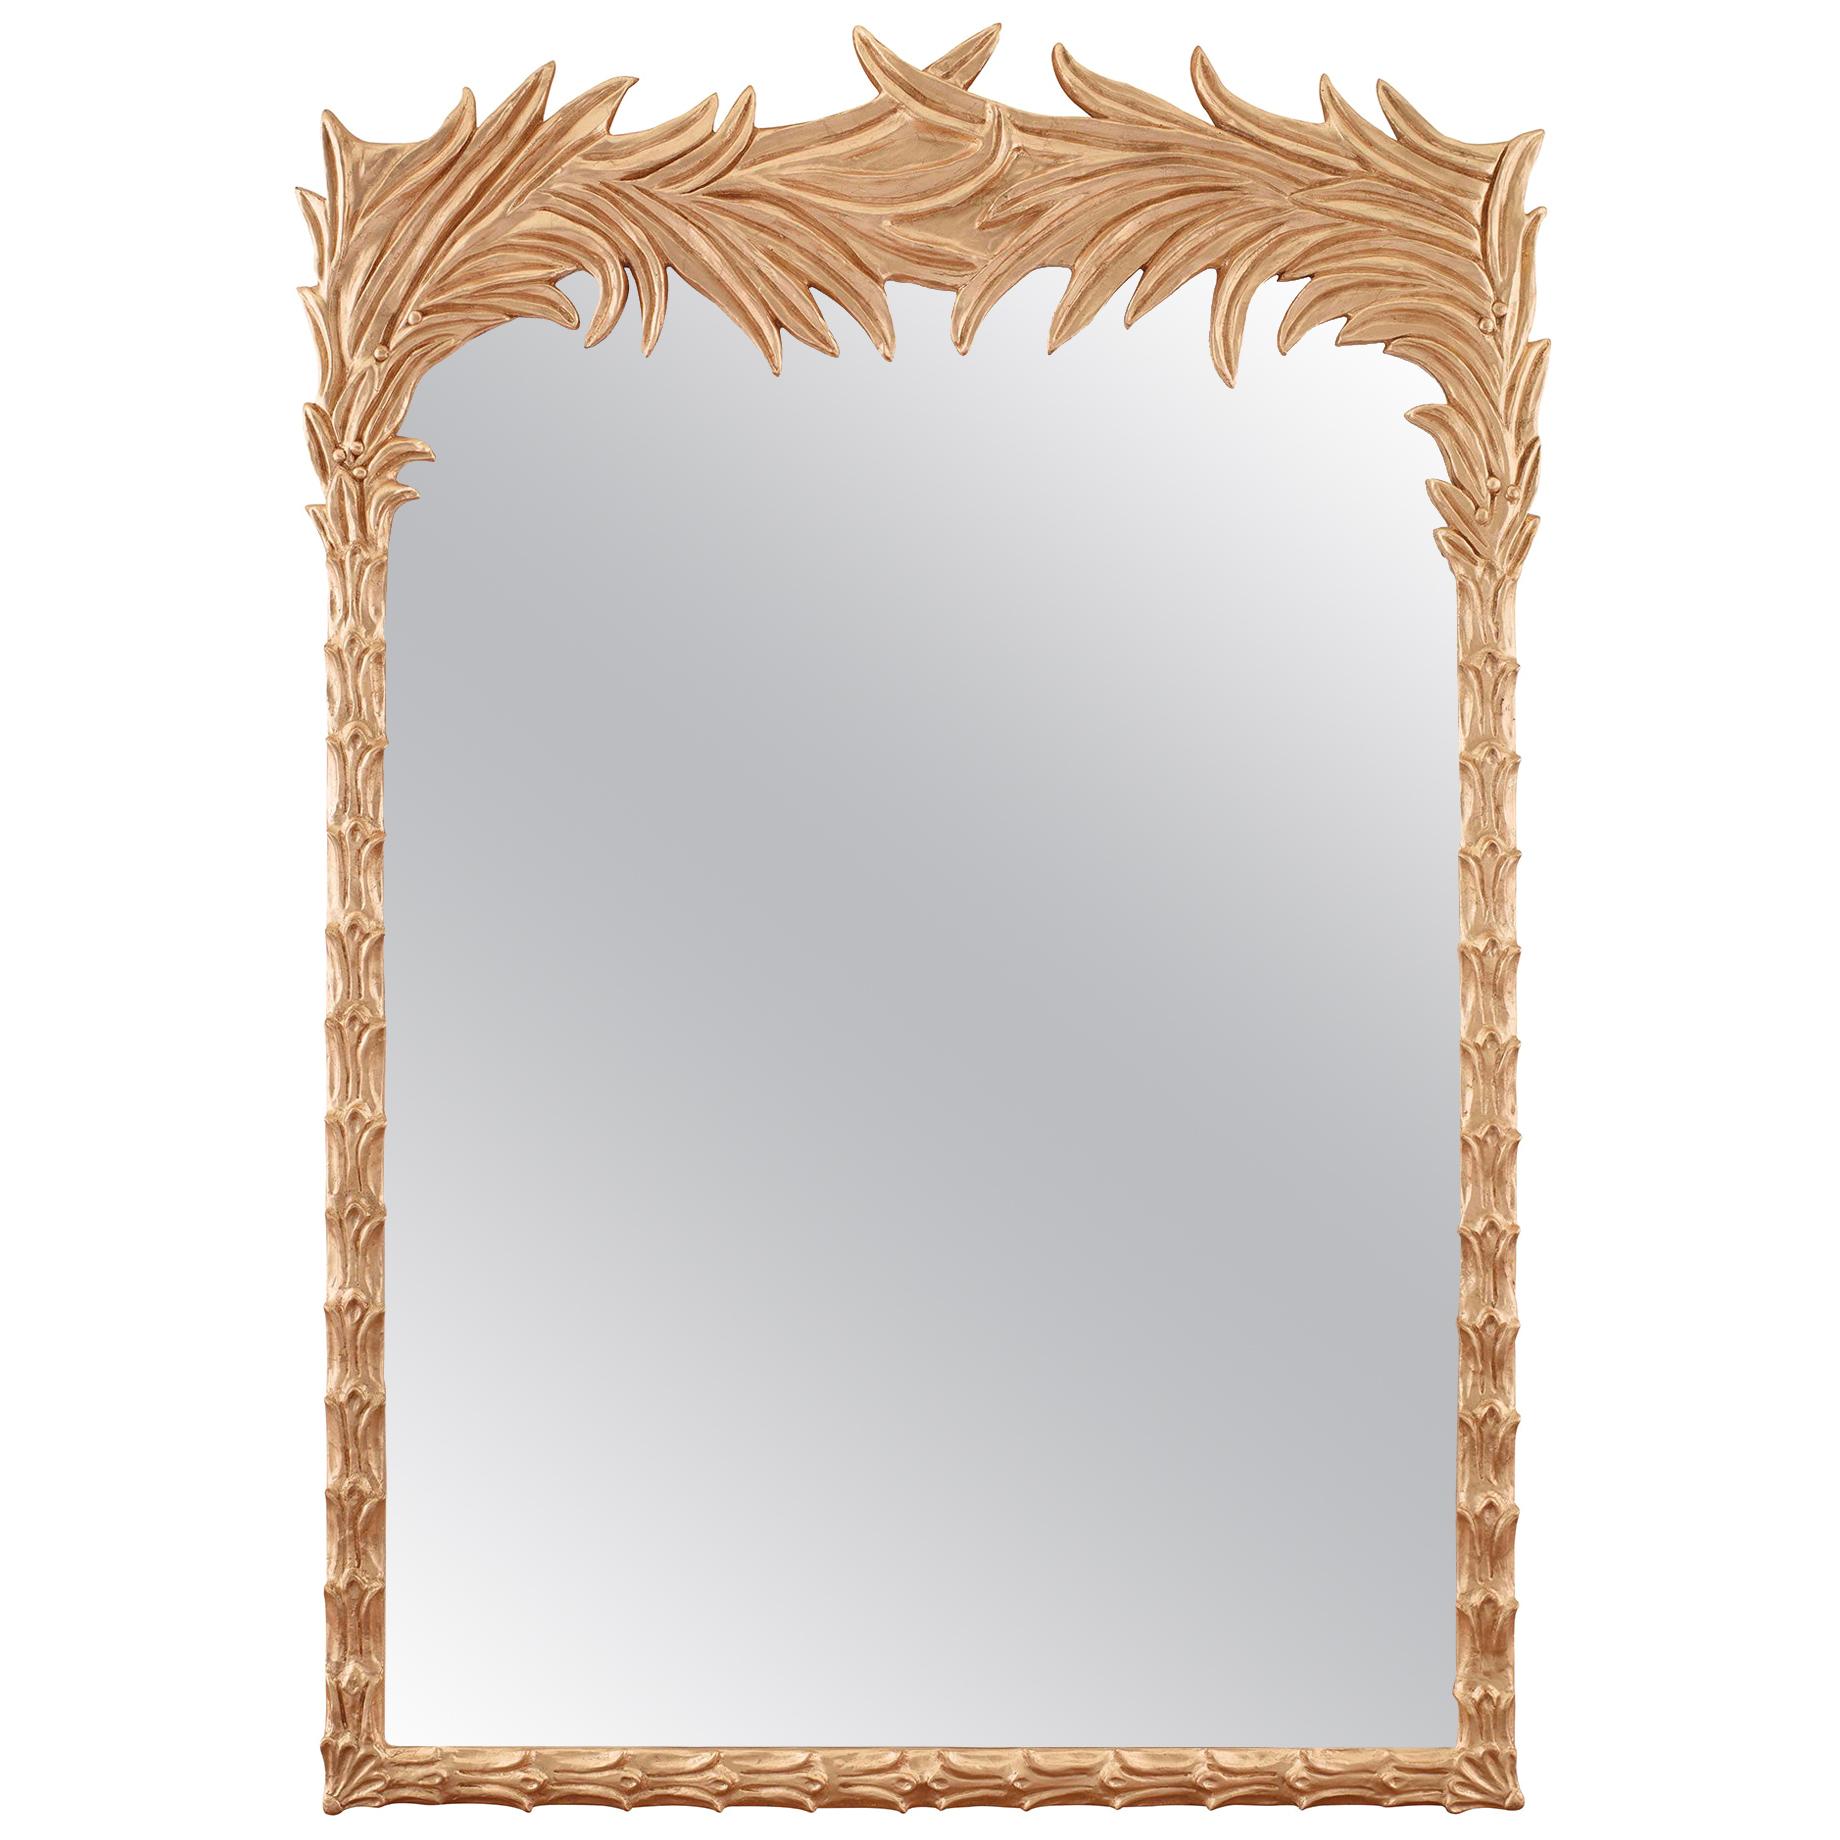 Jan Showers Santa Monica Mirror with Feather Border for CuratedKravet